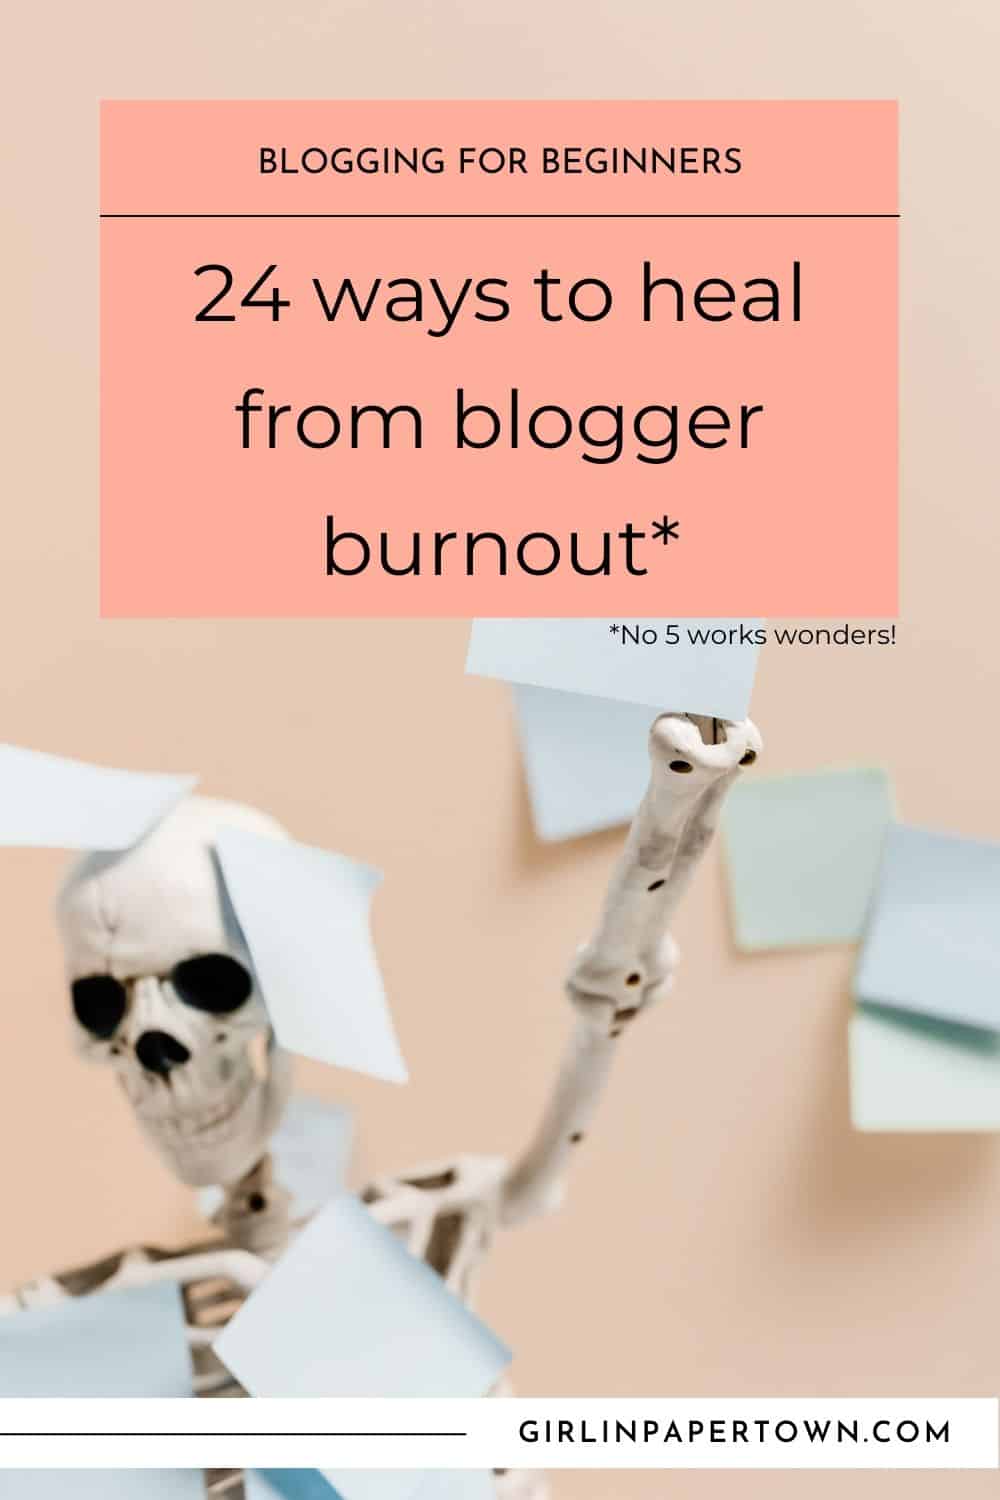 Blogging for beginners - 24 ways to heal from blogger burnout